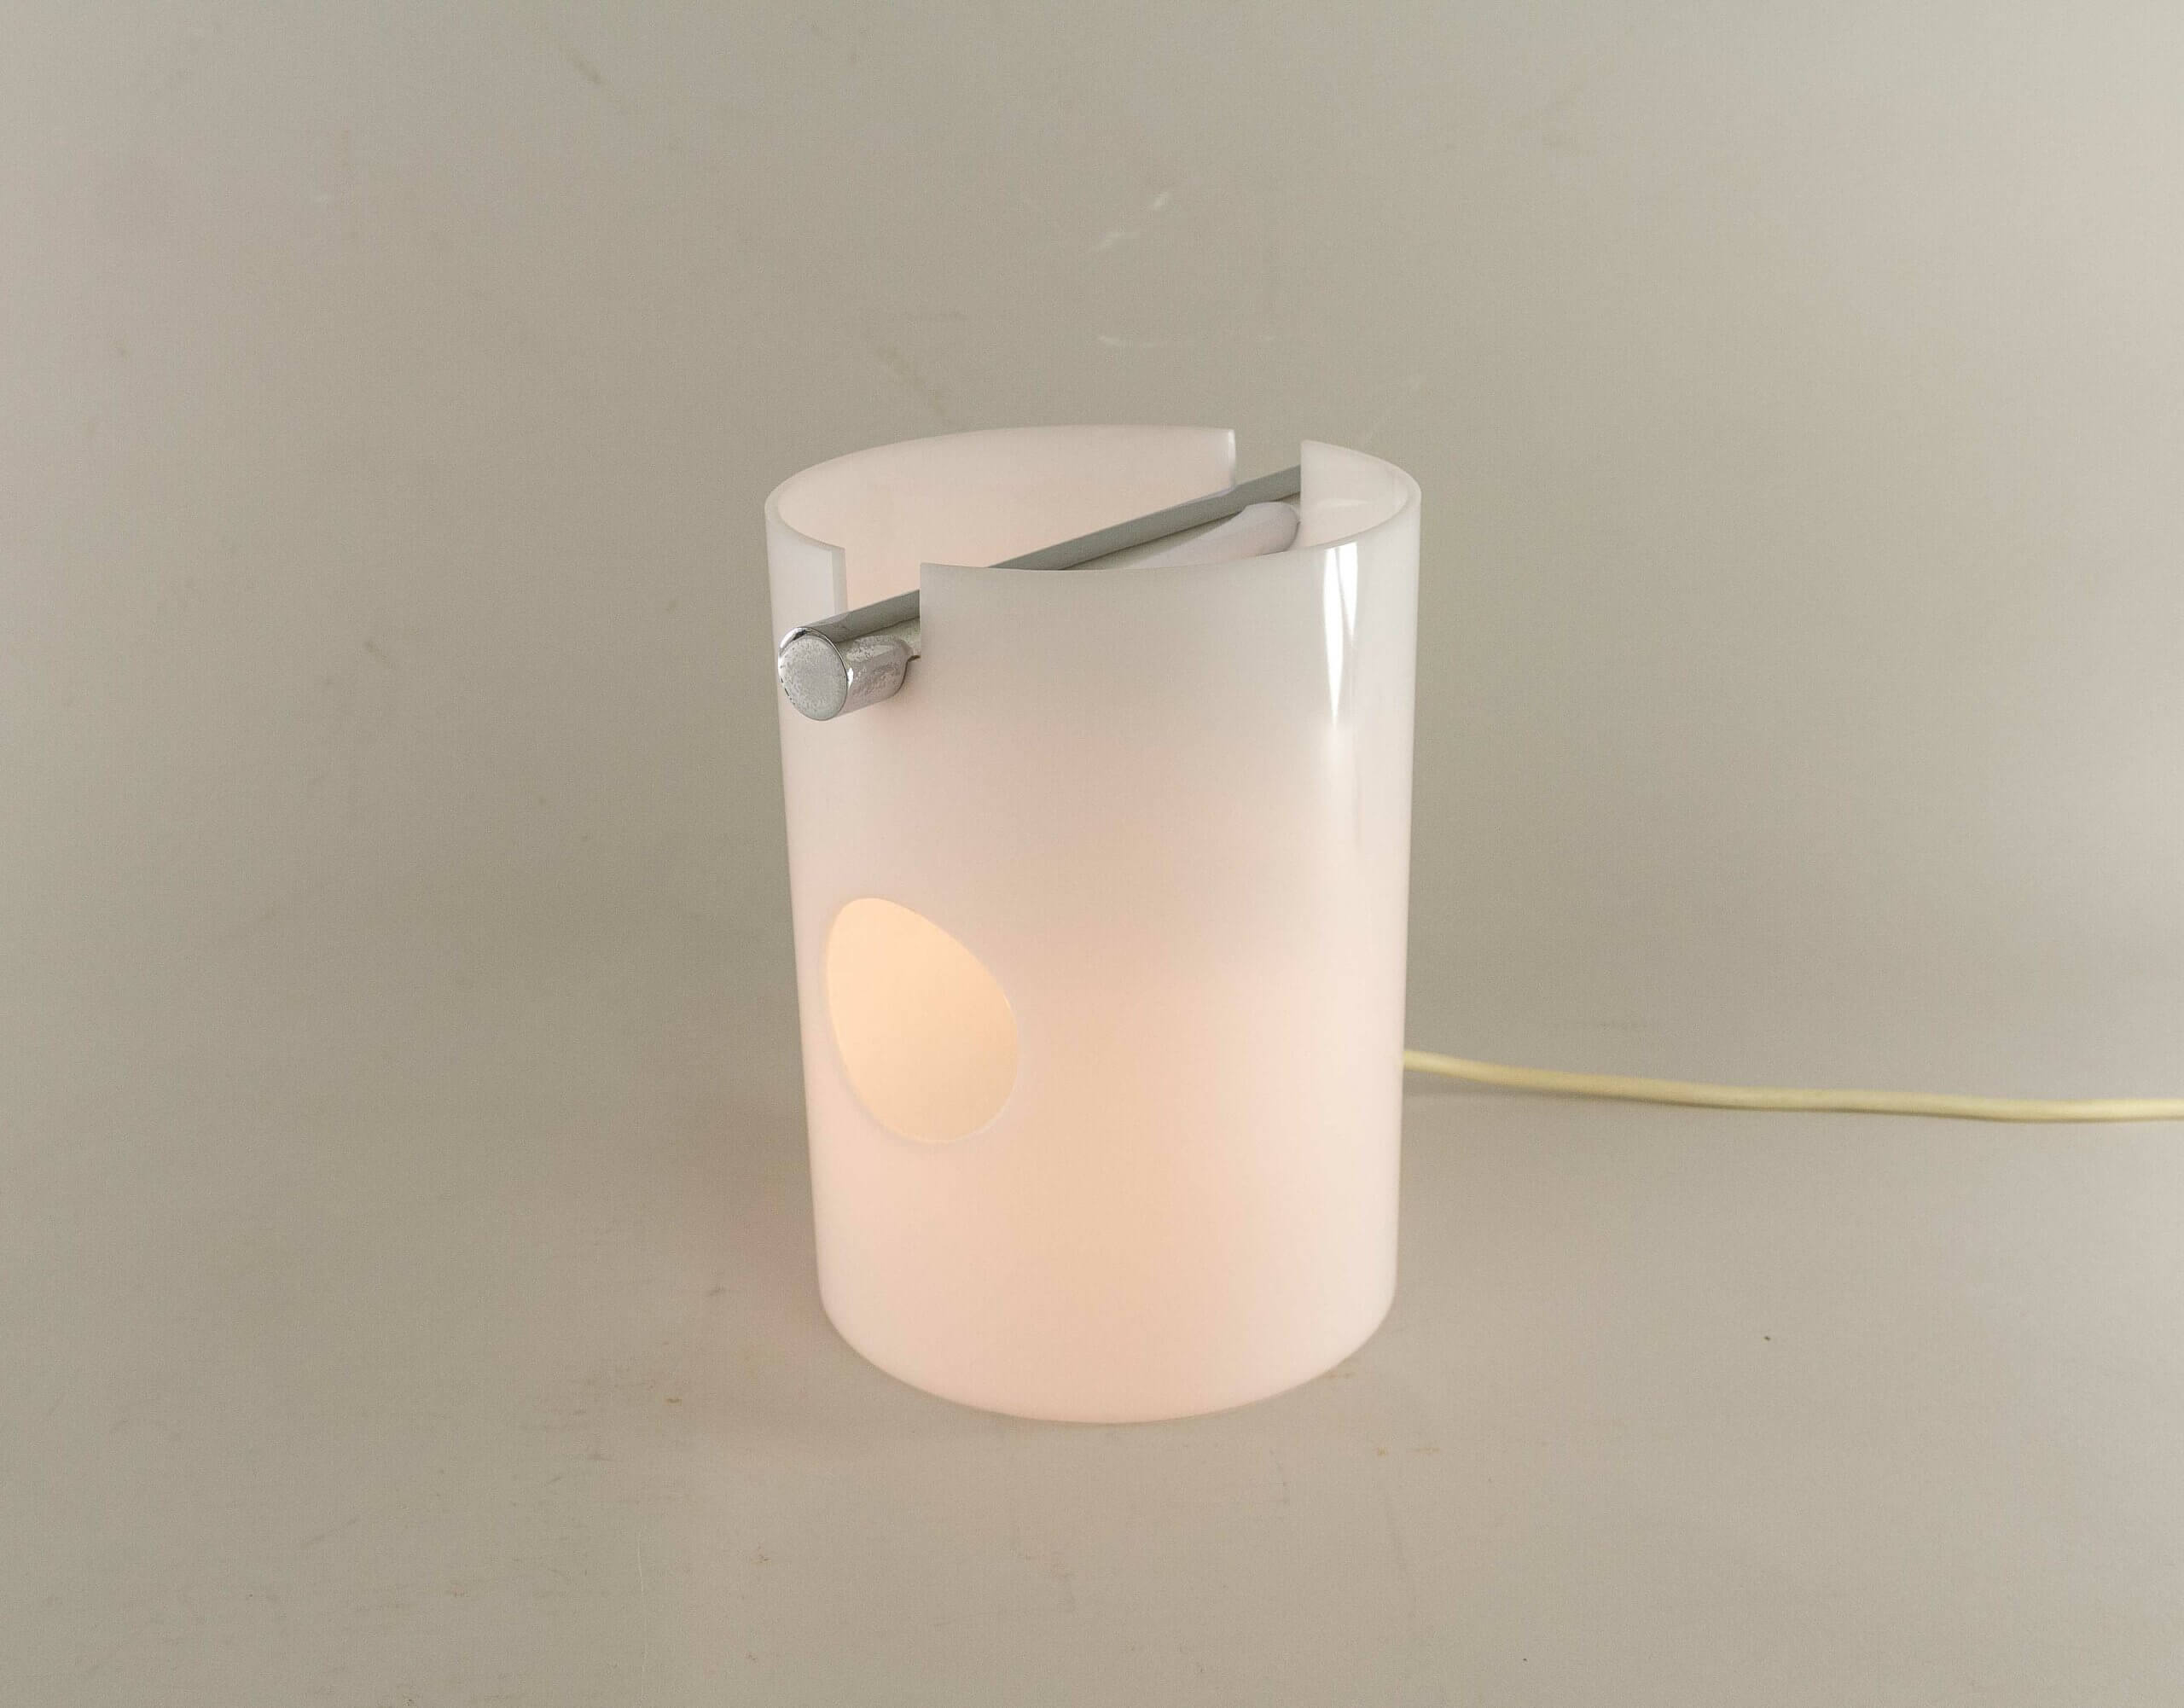 Electra glass table lamp by Giuliana Gramigna for Artemide